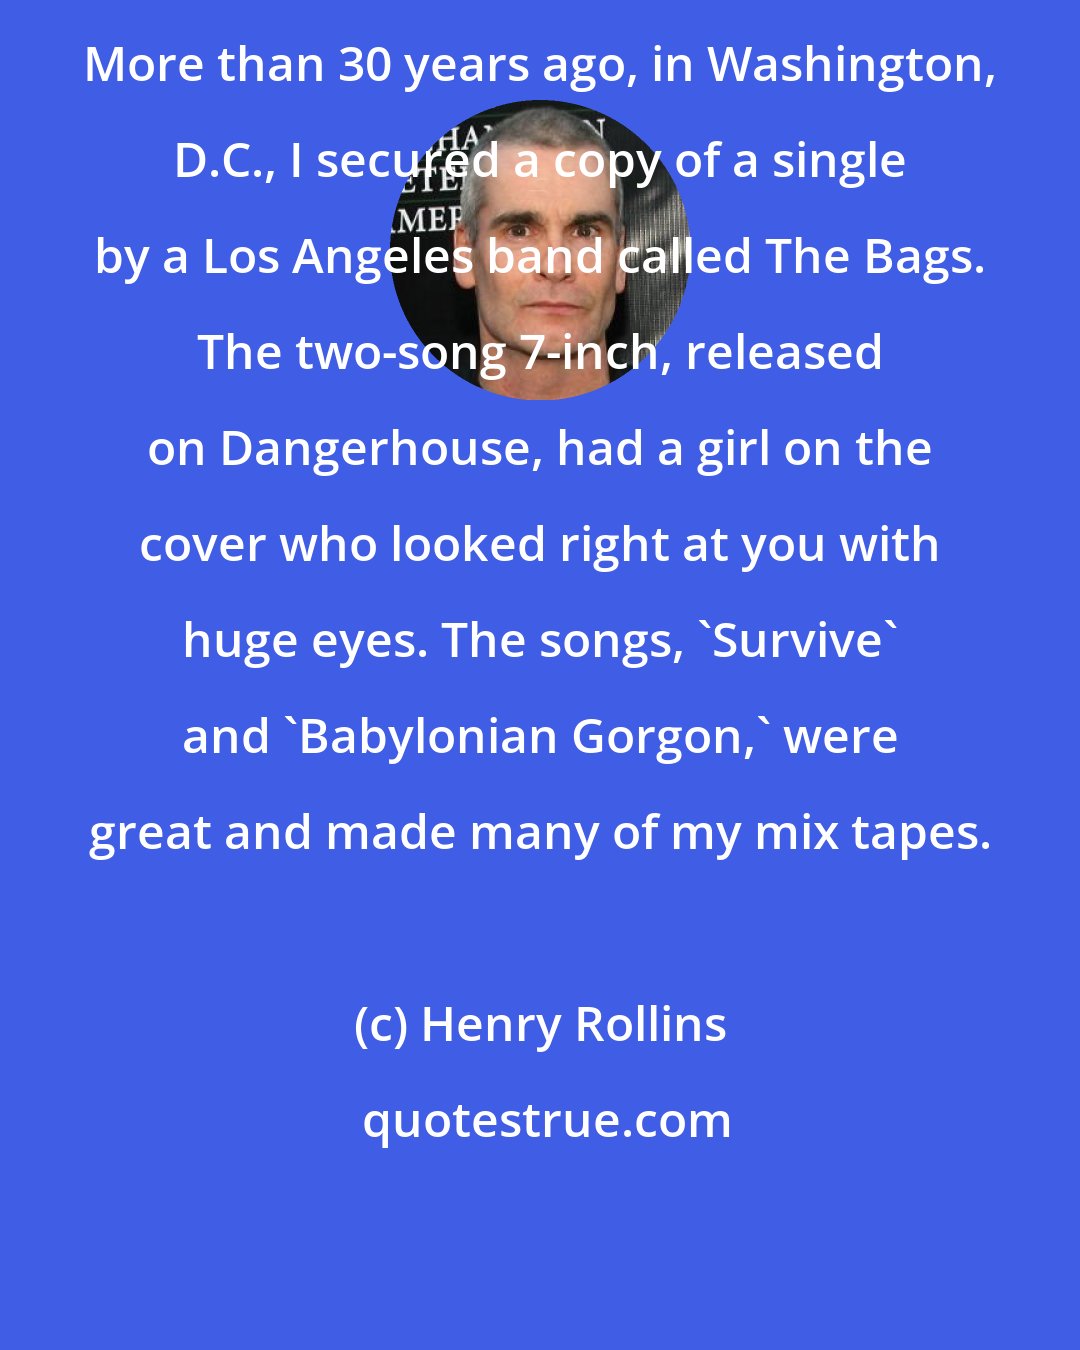 Henry Rollins: More than 30 years ago, in Washington, D.C., I secured a copy of a single by a Los Angeles band called The Bags. The two-song 7-inch, released on Dangerhouse, had a girl on the cover who looked right at you with huge eyes. The songs, 'Survive' and 'Babylonian Gorgon,' were great and made many of my mix tapes.